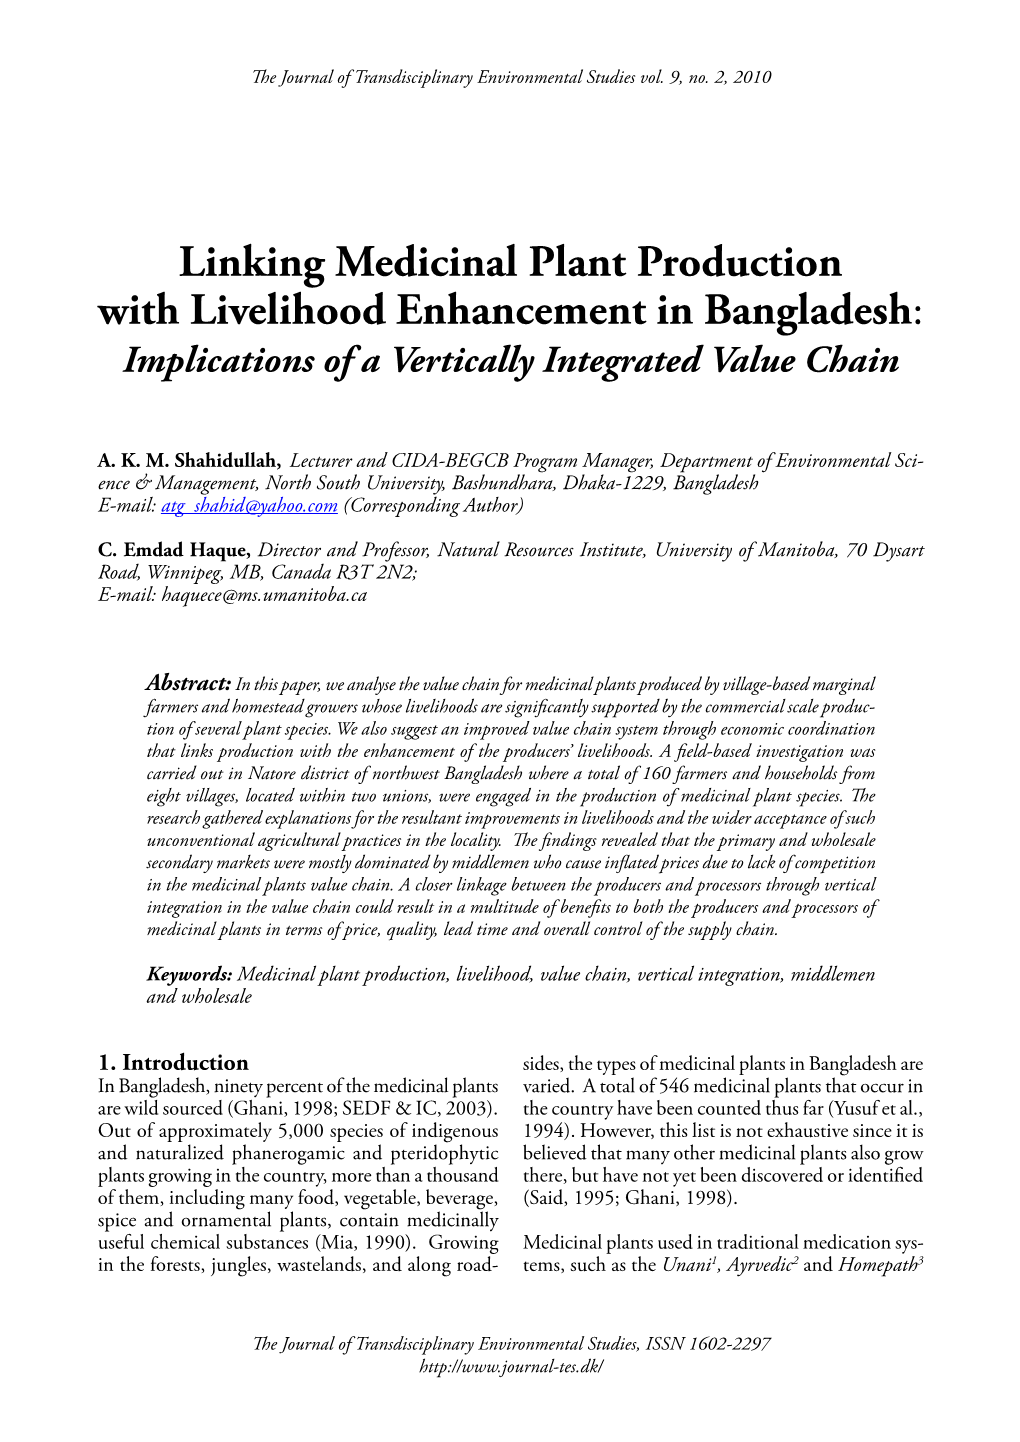 Linking Medicinal Plant Production with Livelihood Enhancement in Bangladesh: Implications of a Vertically Integrated Value Chain